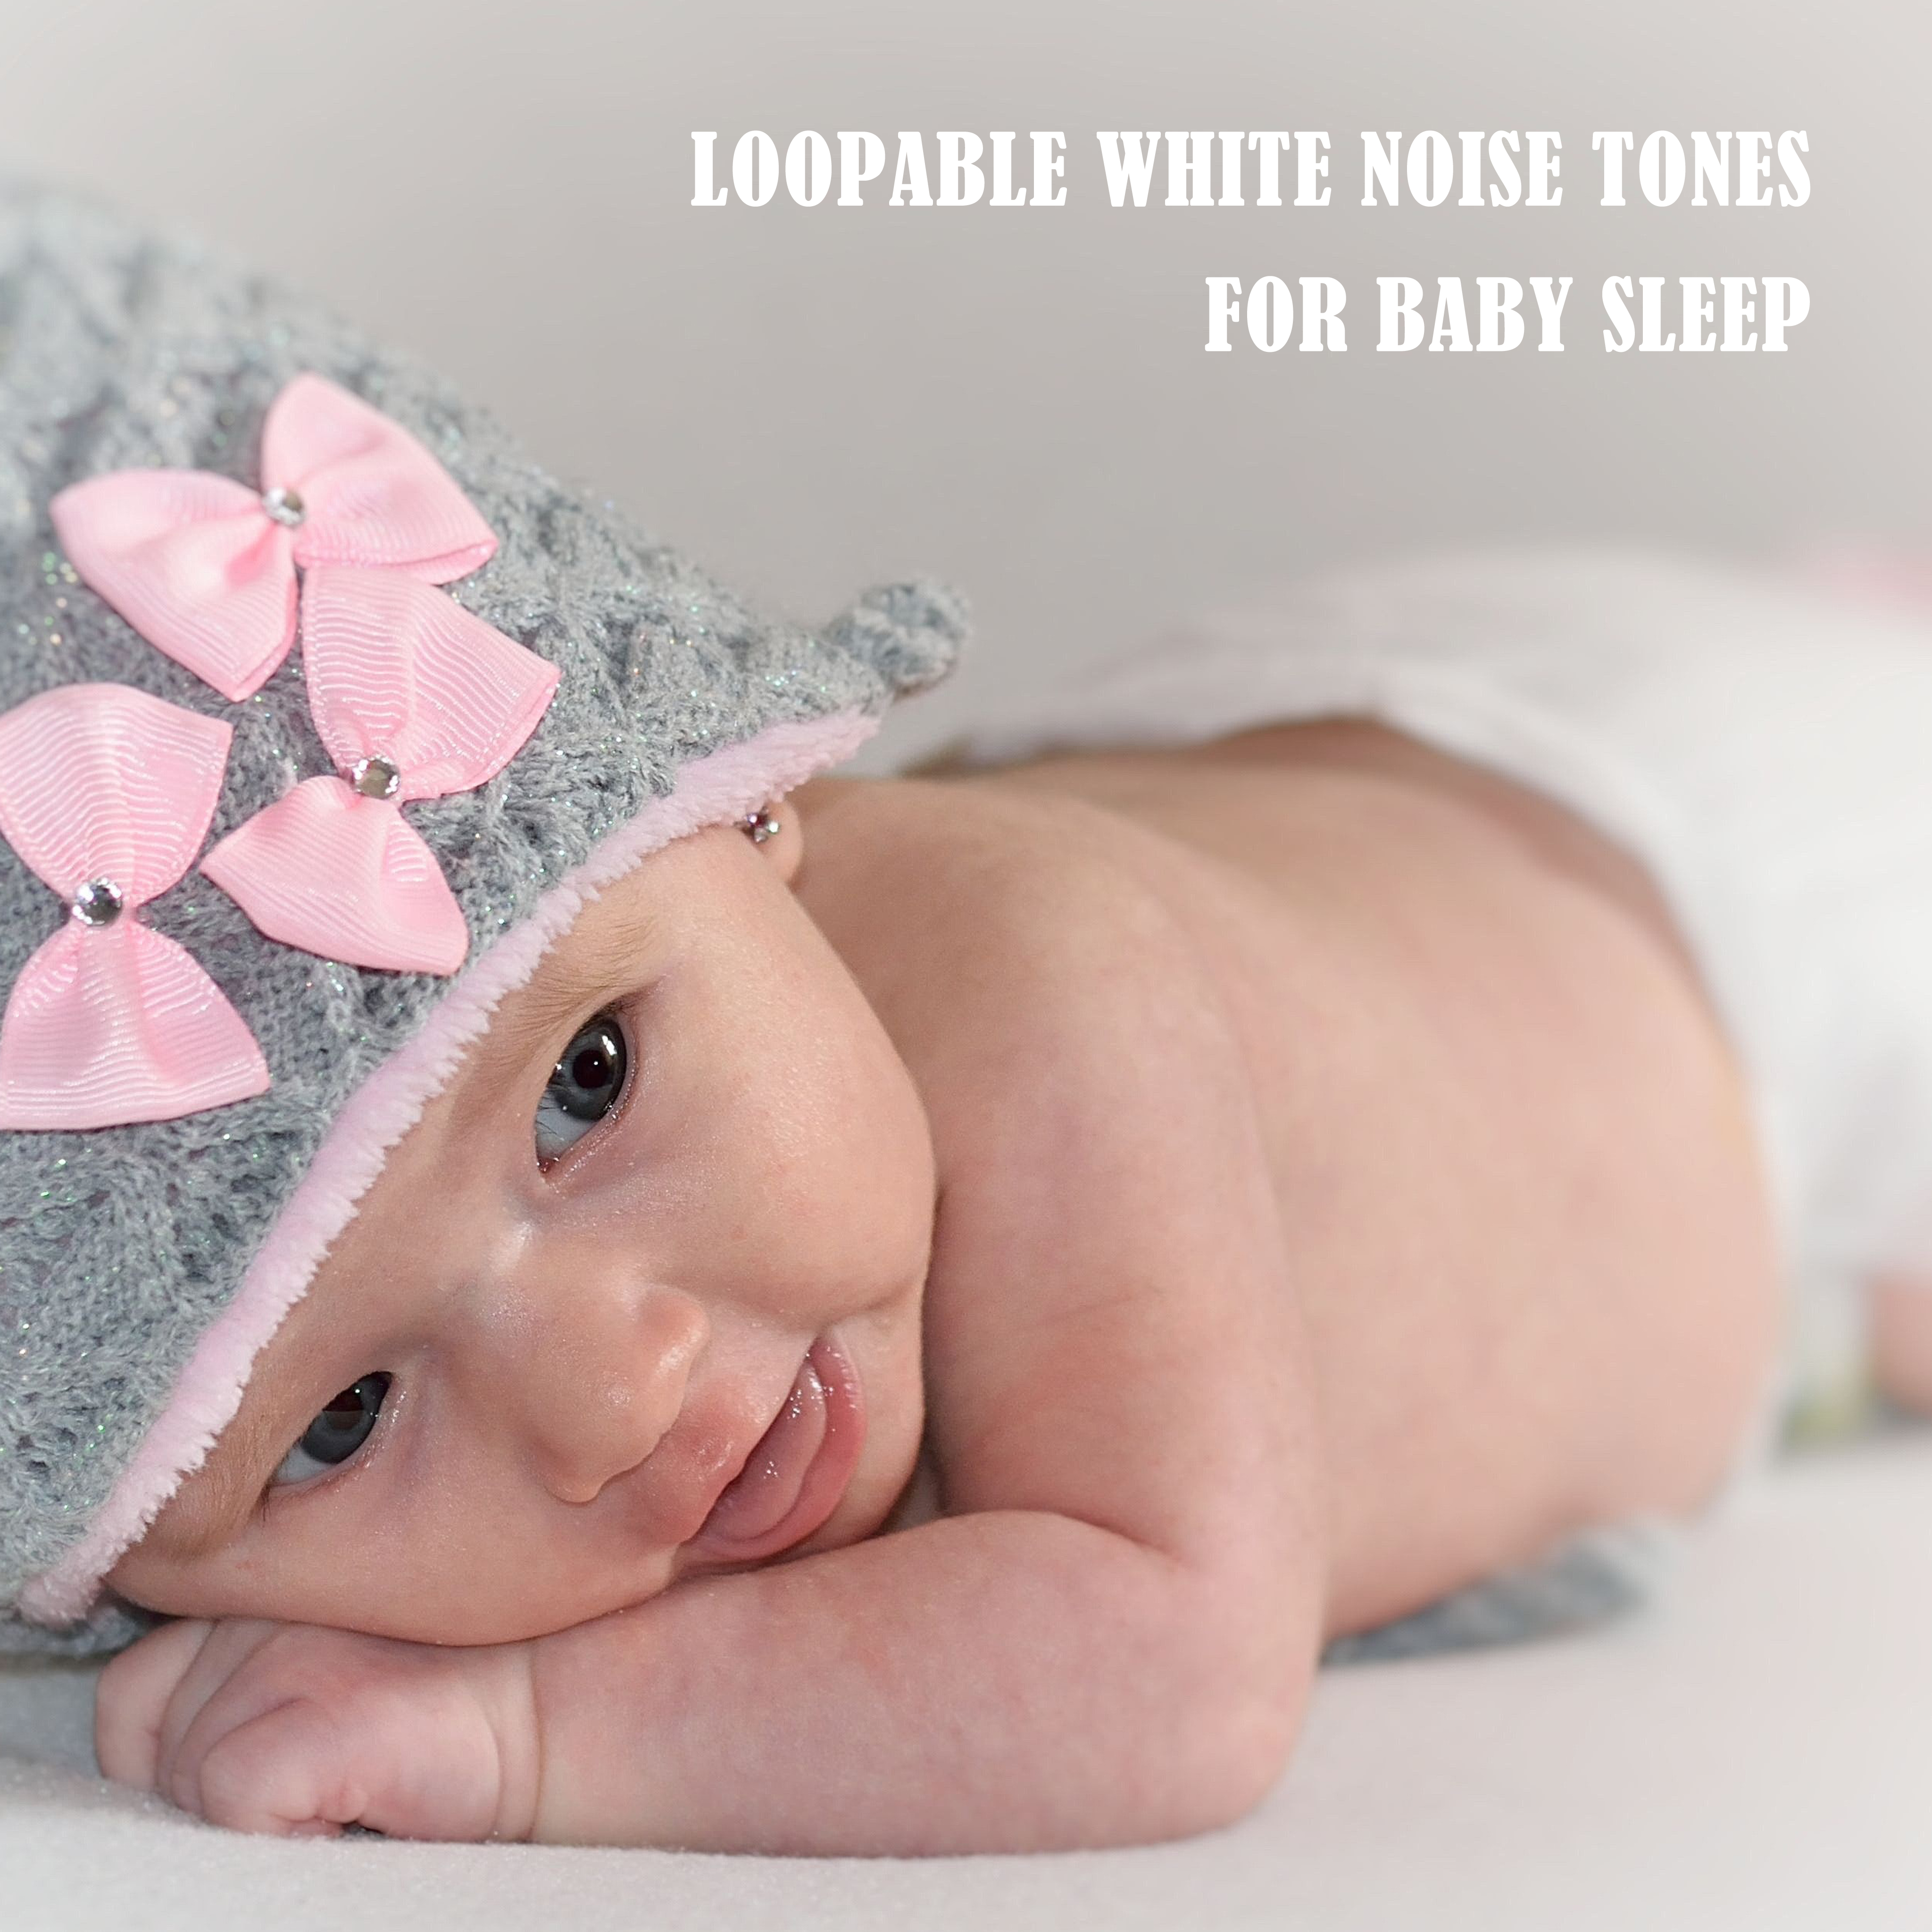 12 Loopable White Noise Tones for Baby Sleep